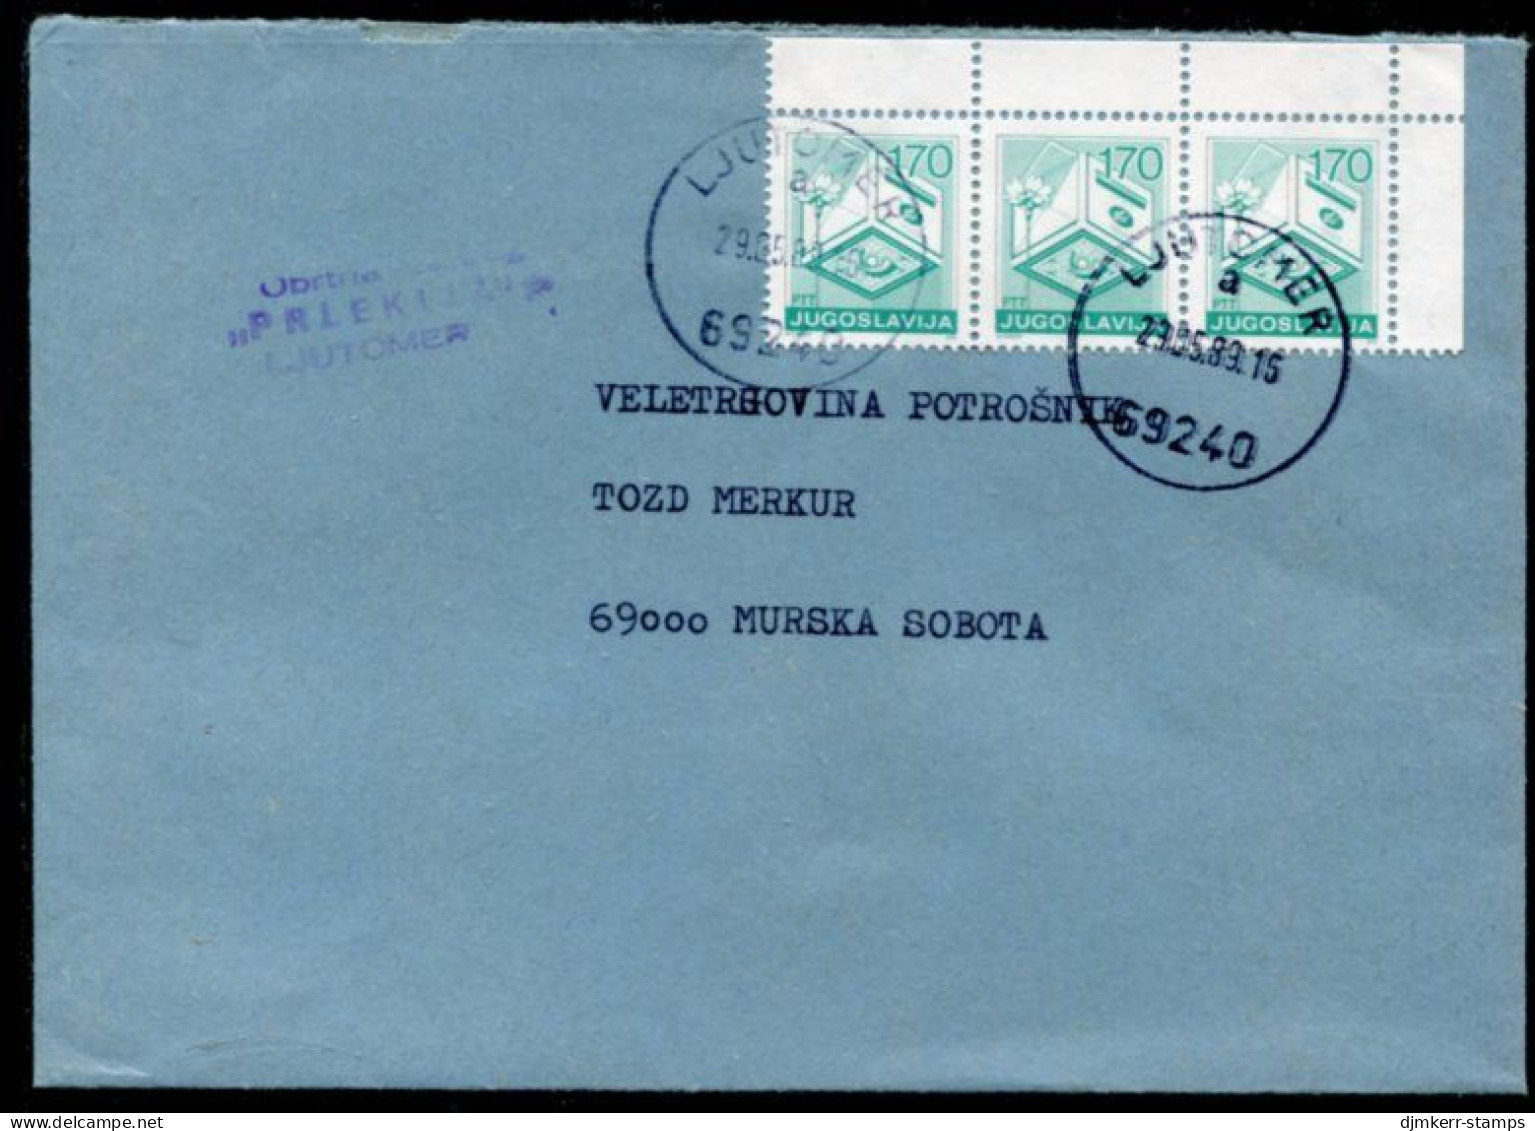 YUGOSLAVIA 1989 Cover Franked With Postal Services 170 D X 3. Michel 2313 - Briefe U. Dokumente